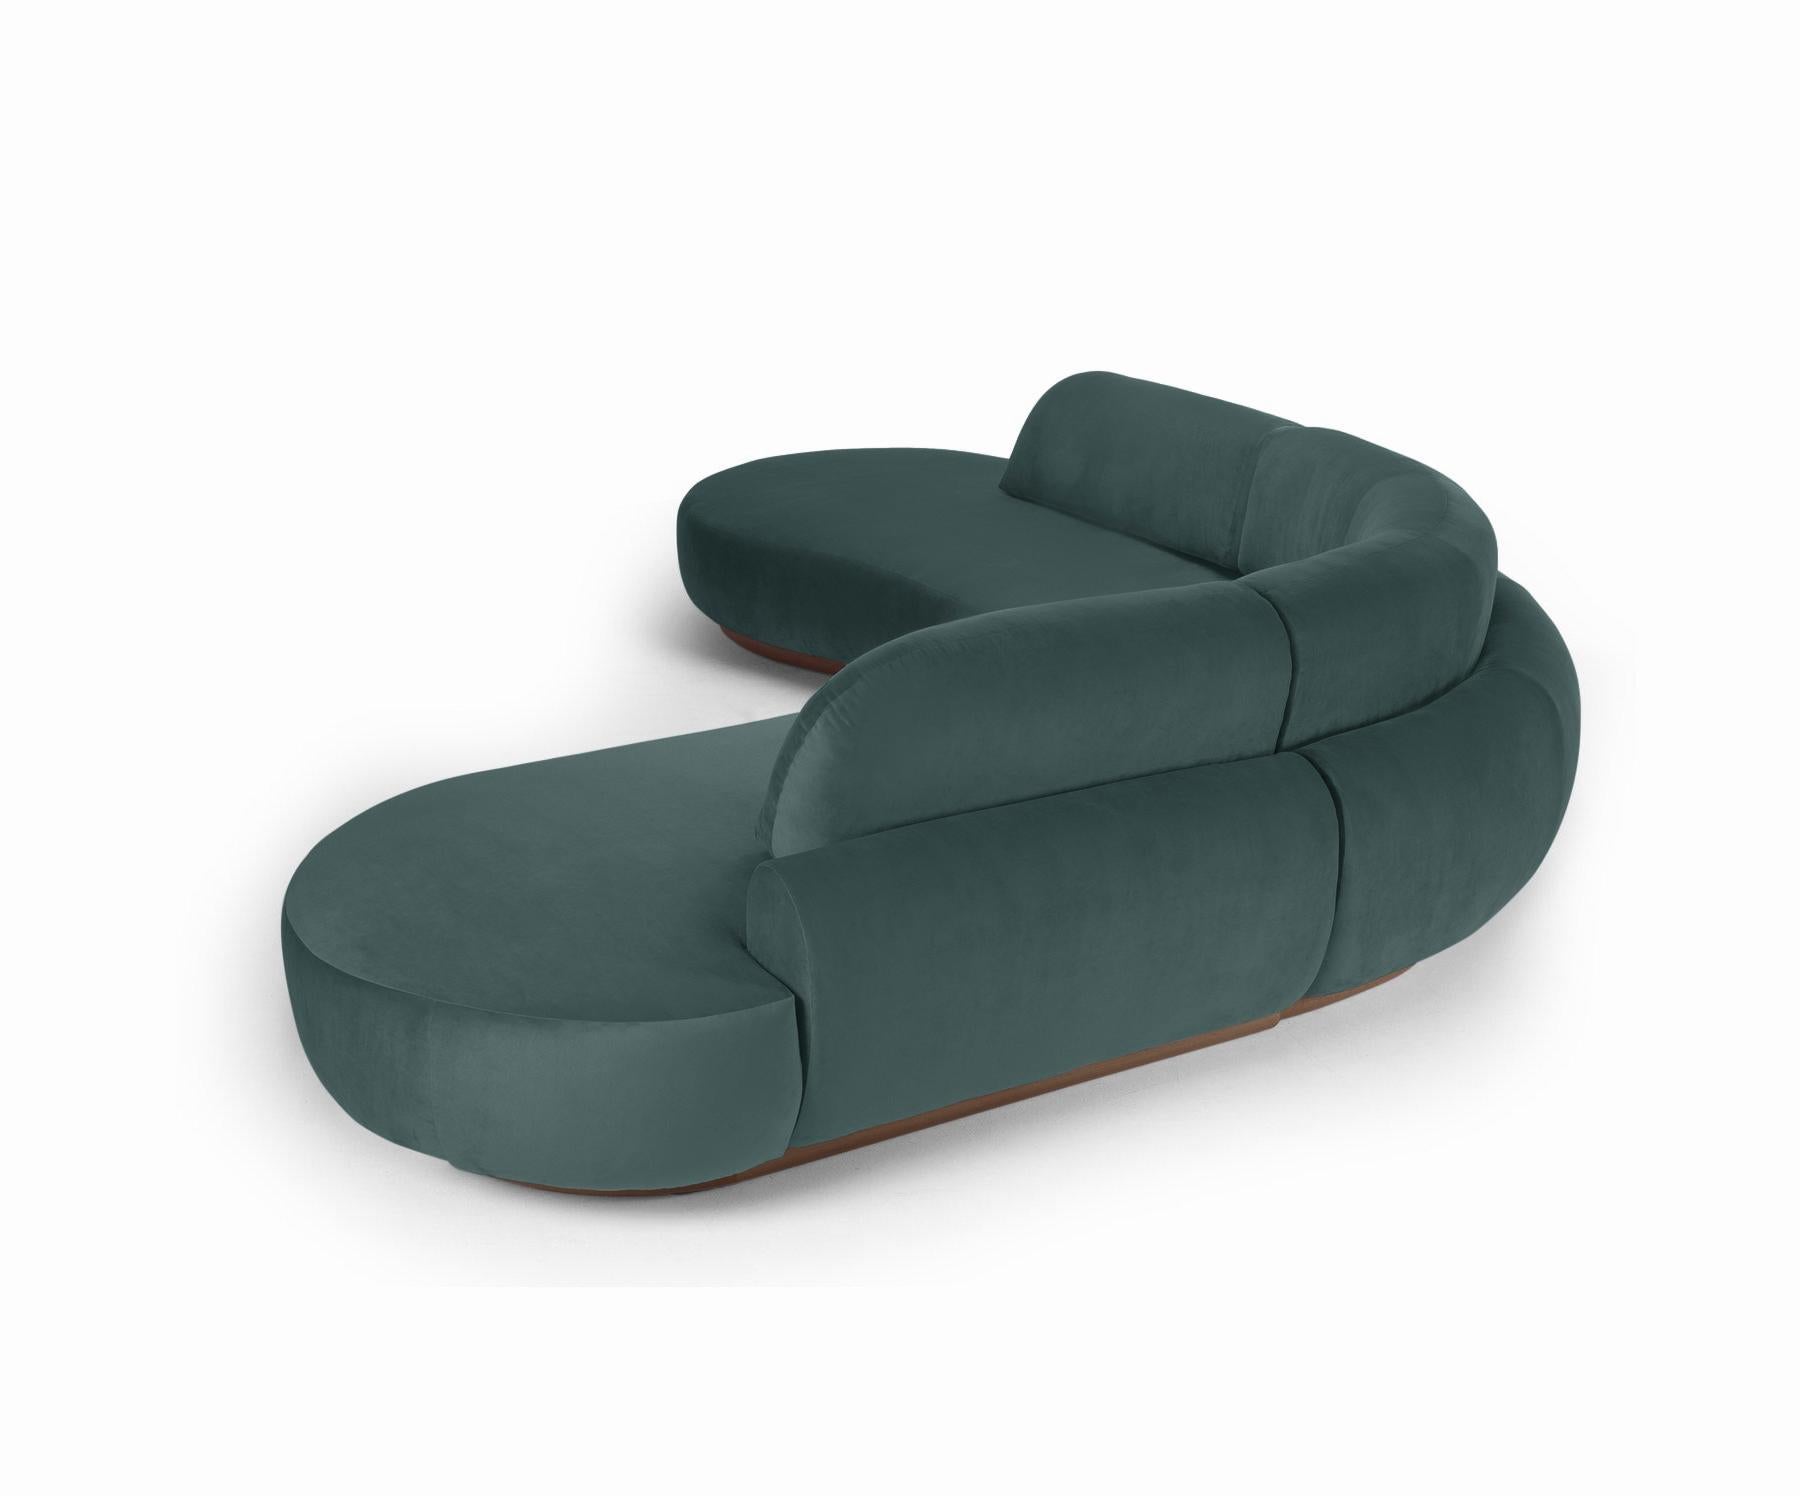 Portuguese Naked Curved Sectional Sofa, 3 Piece with Beech Ash-056-1 and Teal For Sale